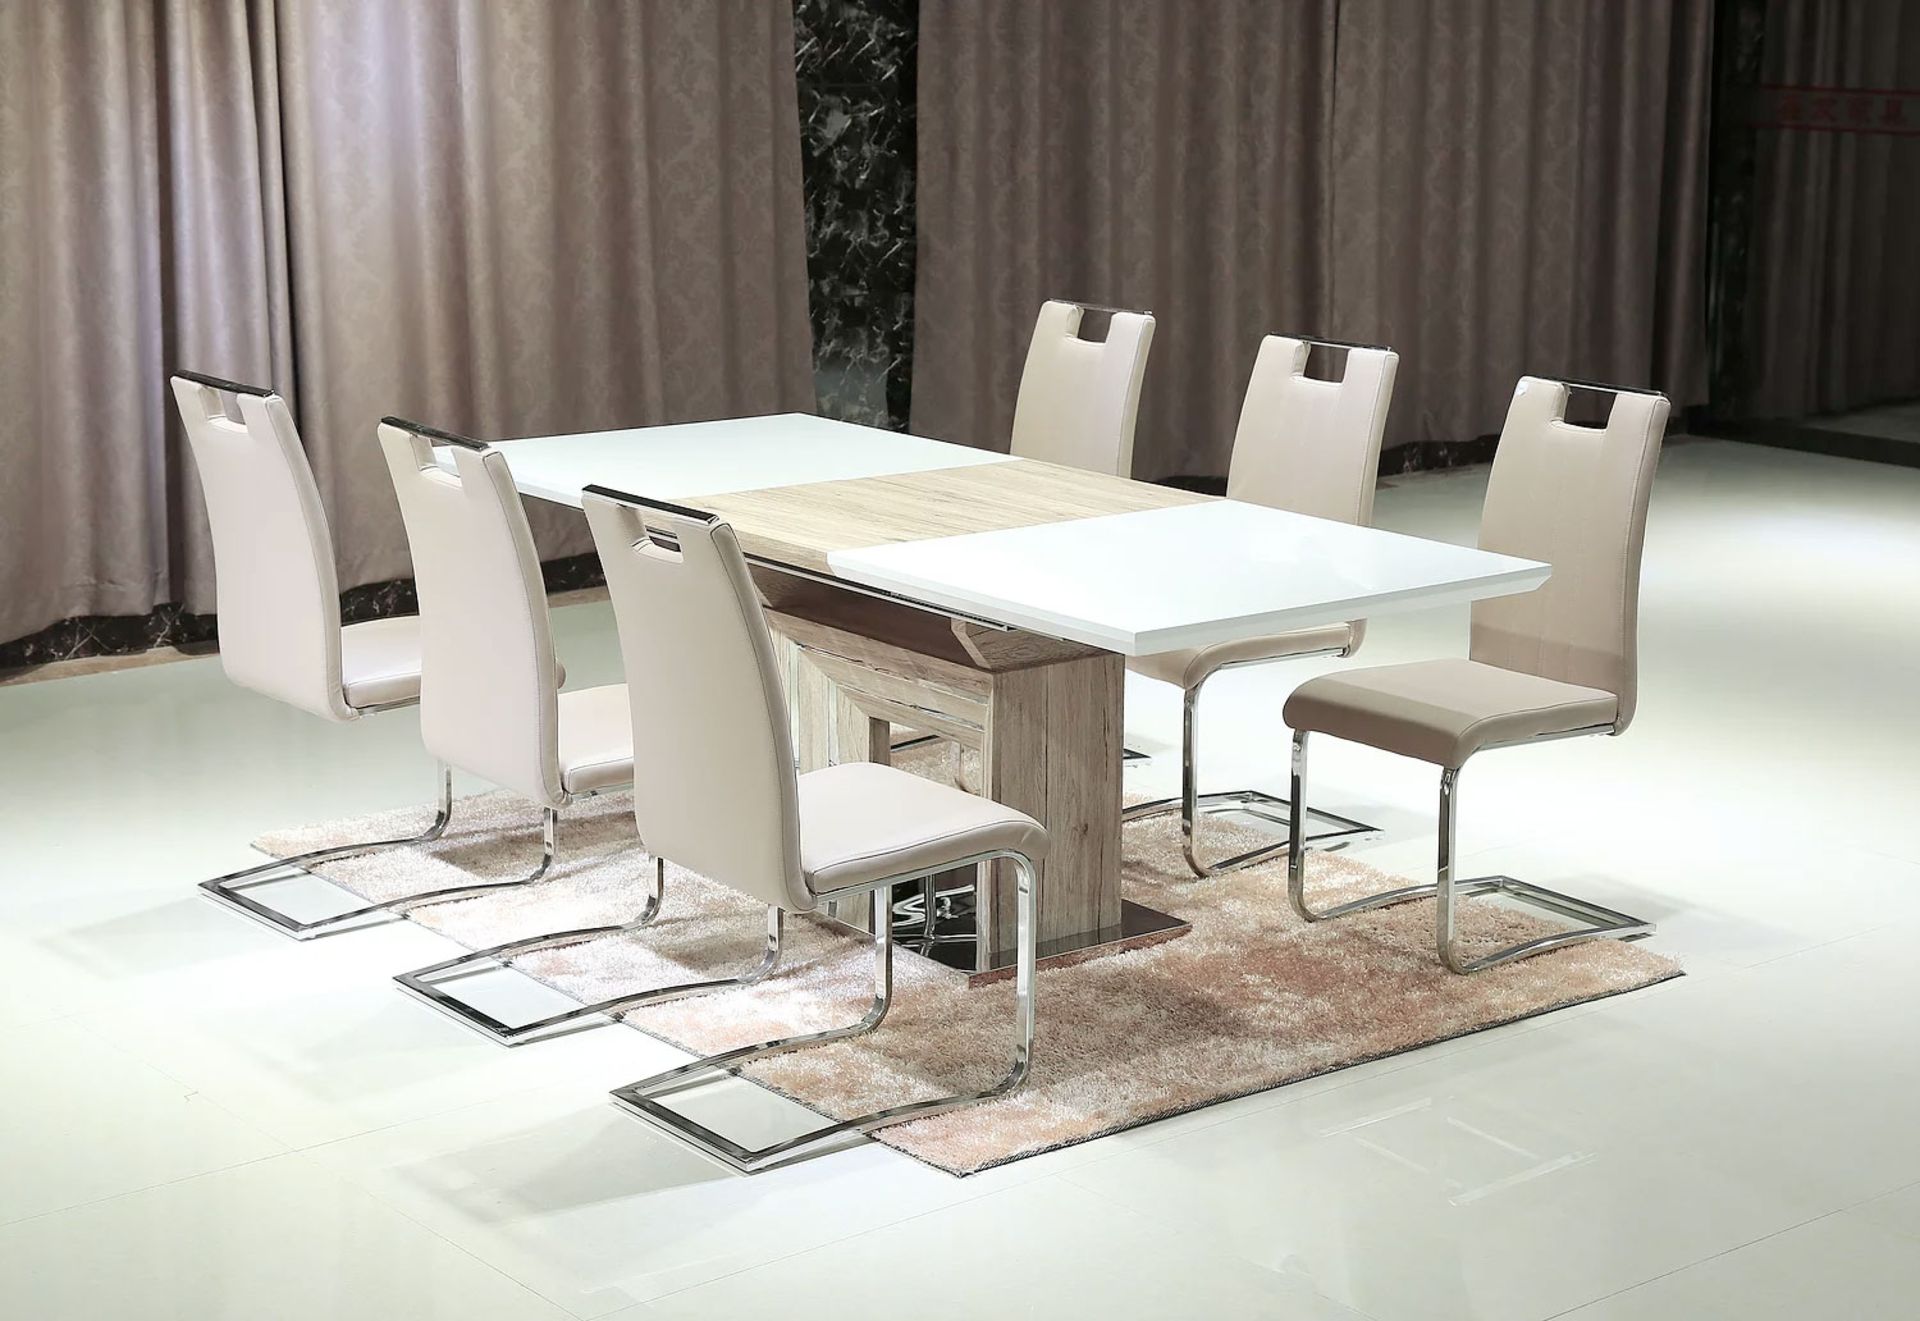 WHITE HIGH GLOSS 4 / 6 PERSON EXTENDABLE DINING TABLE W/ WOOD LIKE ACCENTS & (2) CHAIRS (AS IS)